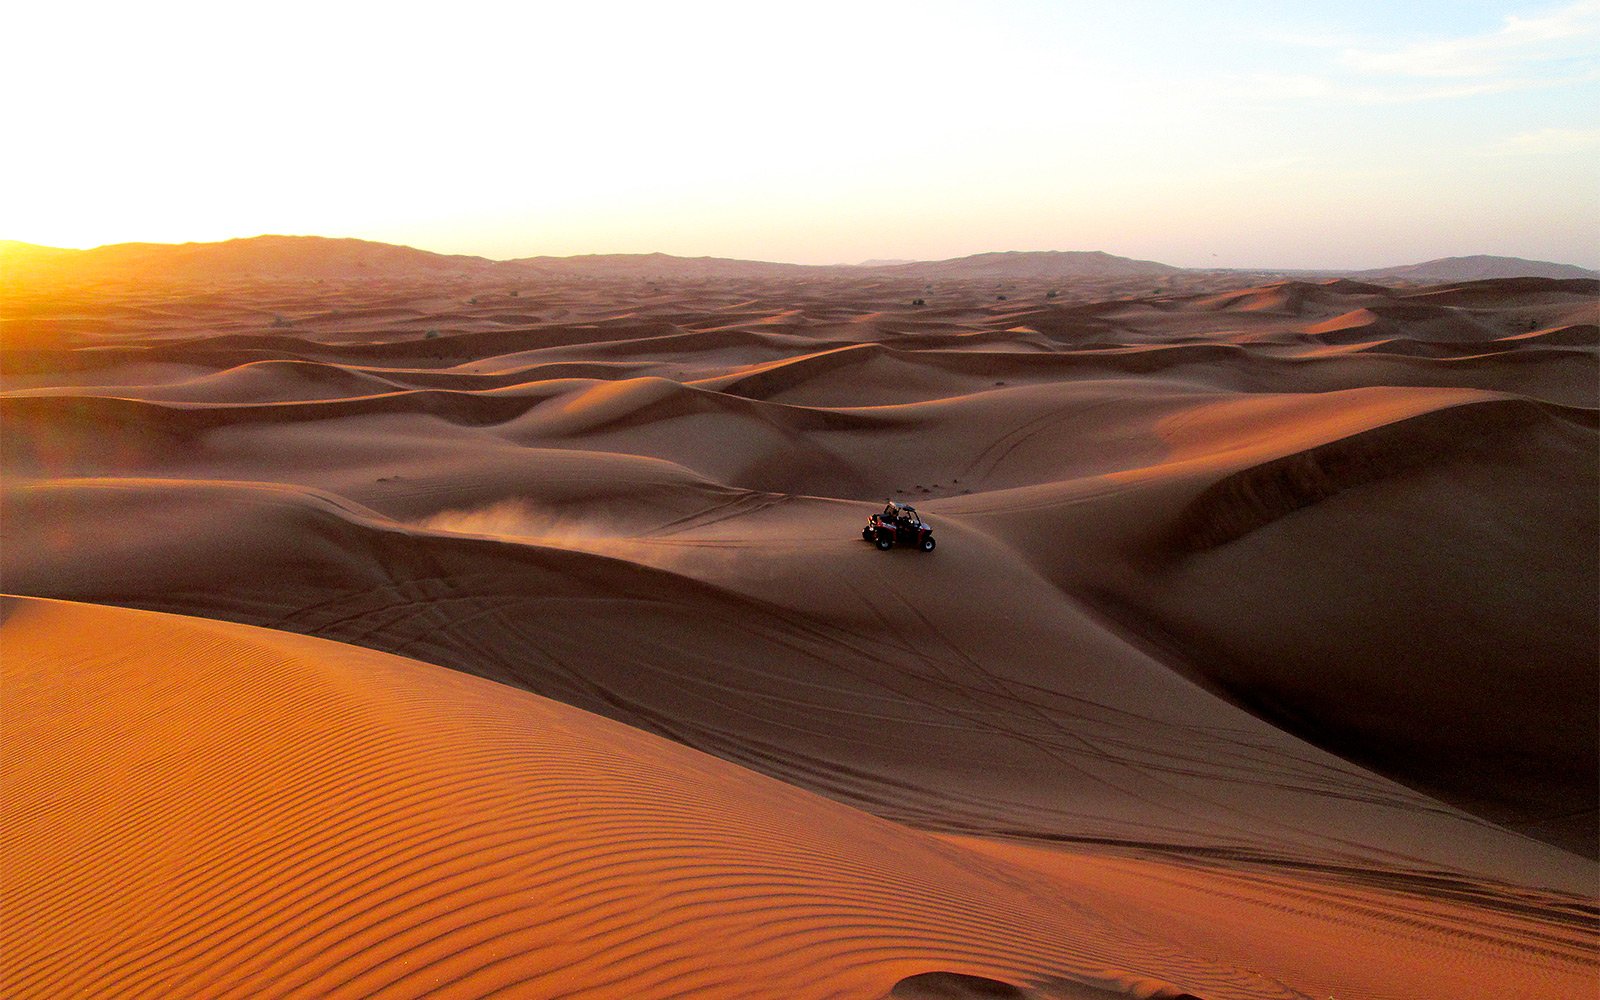 How to go buggy driving in the desert in Dubai